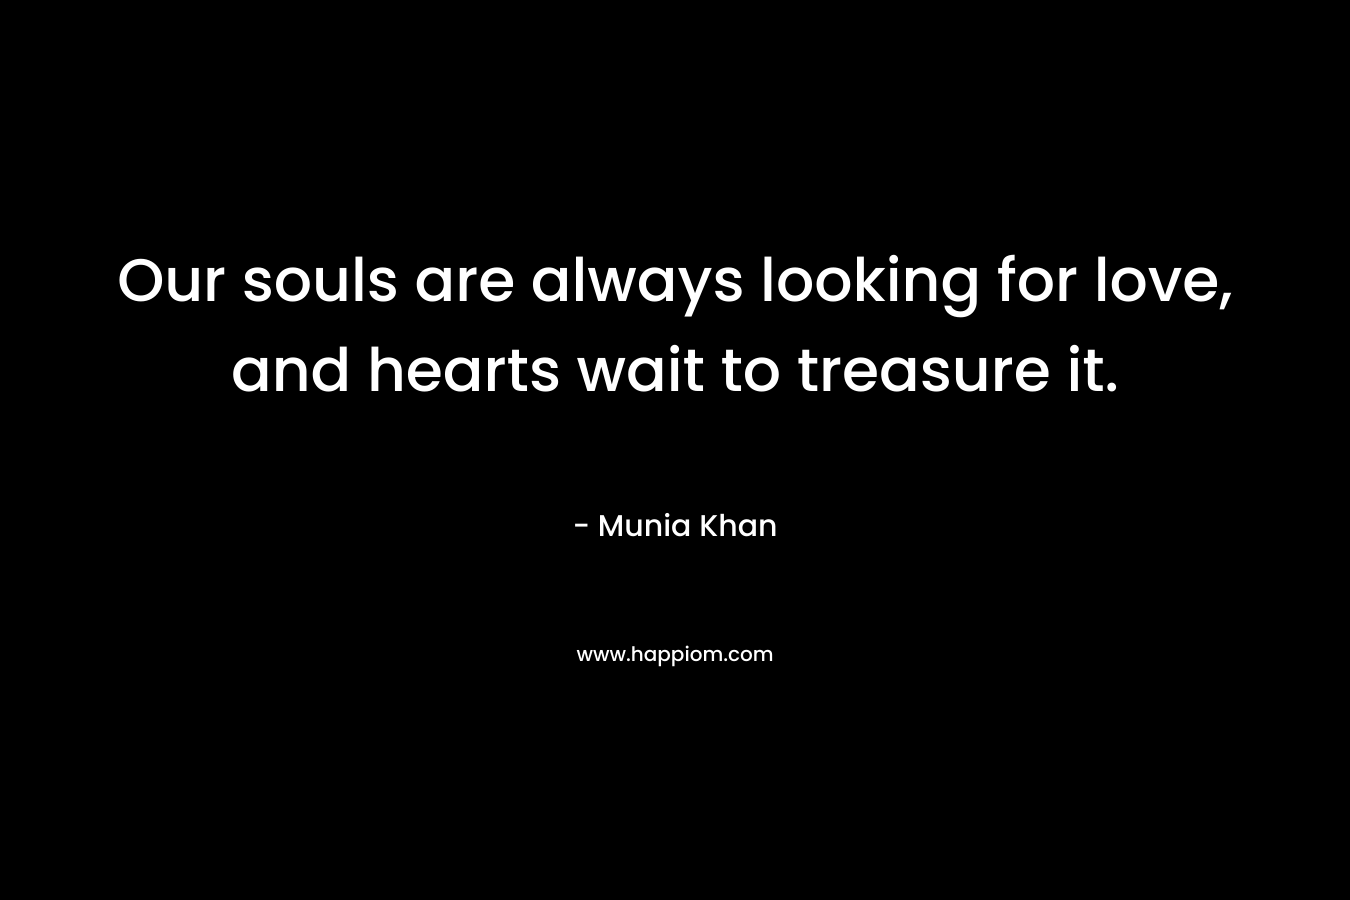 Our souls are always looking for love, and hearts wait to treasure it.